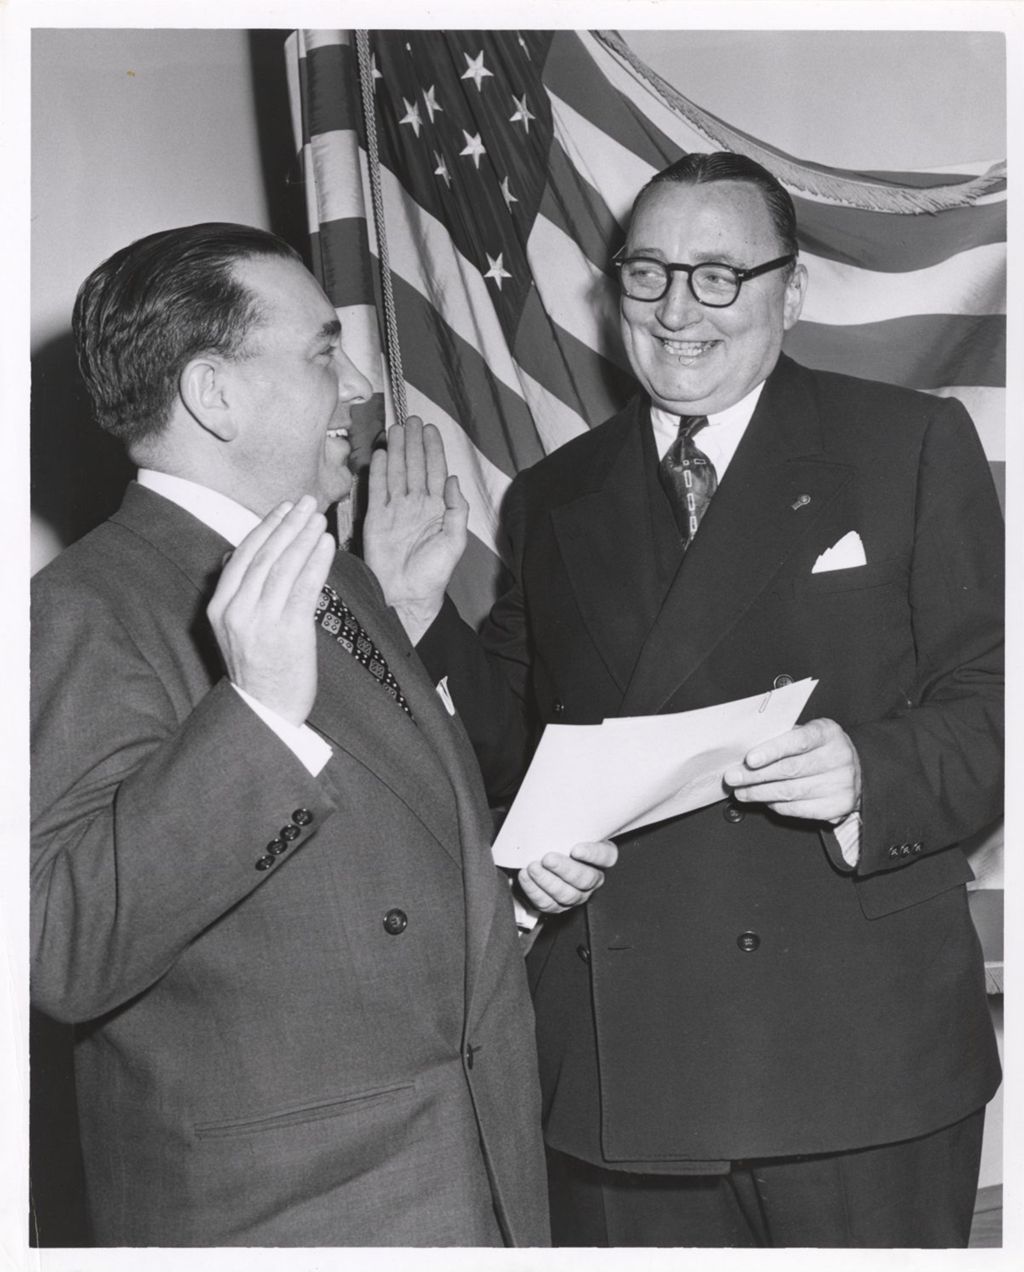 Miniature of Richard J. Daley administers oath to William N. Erickson